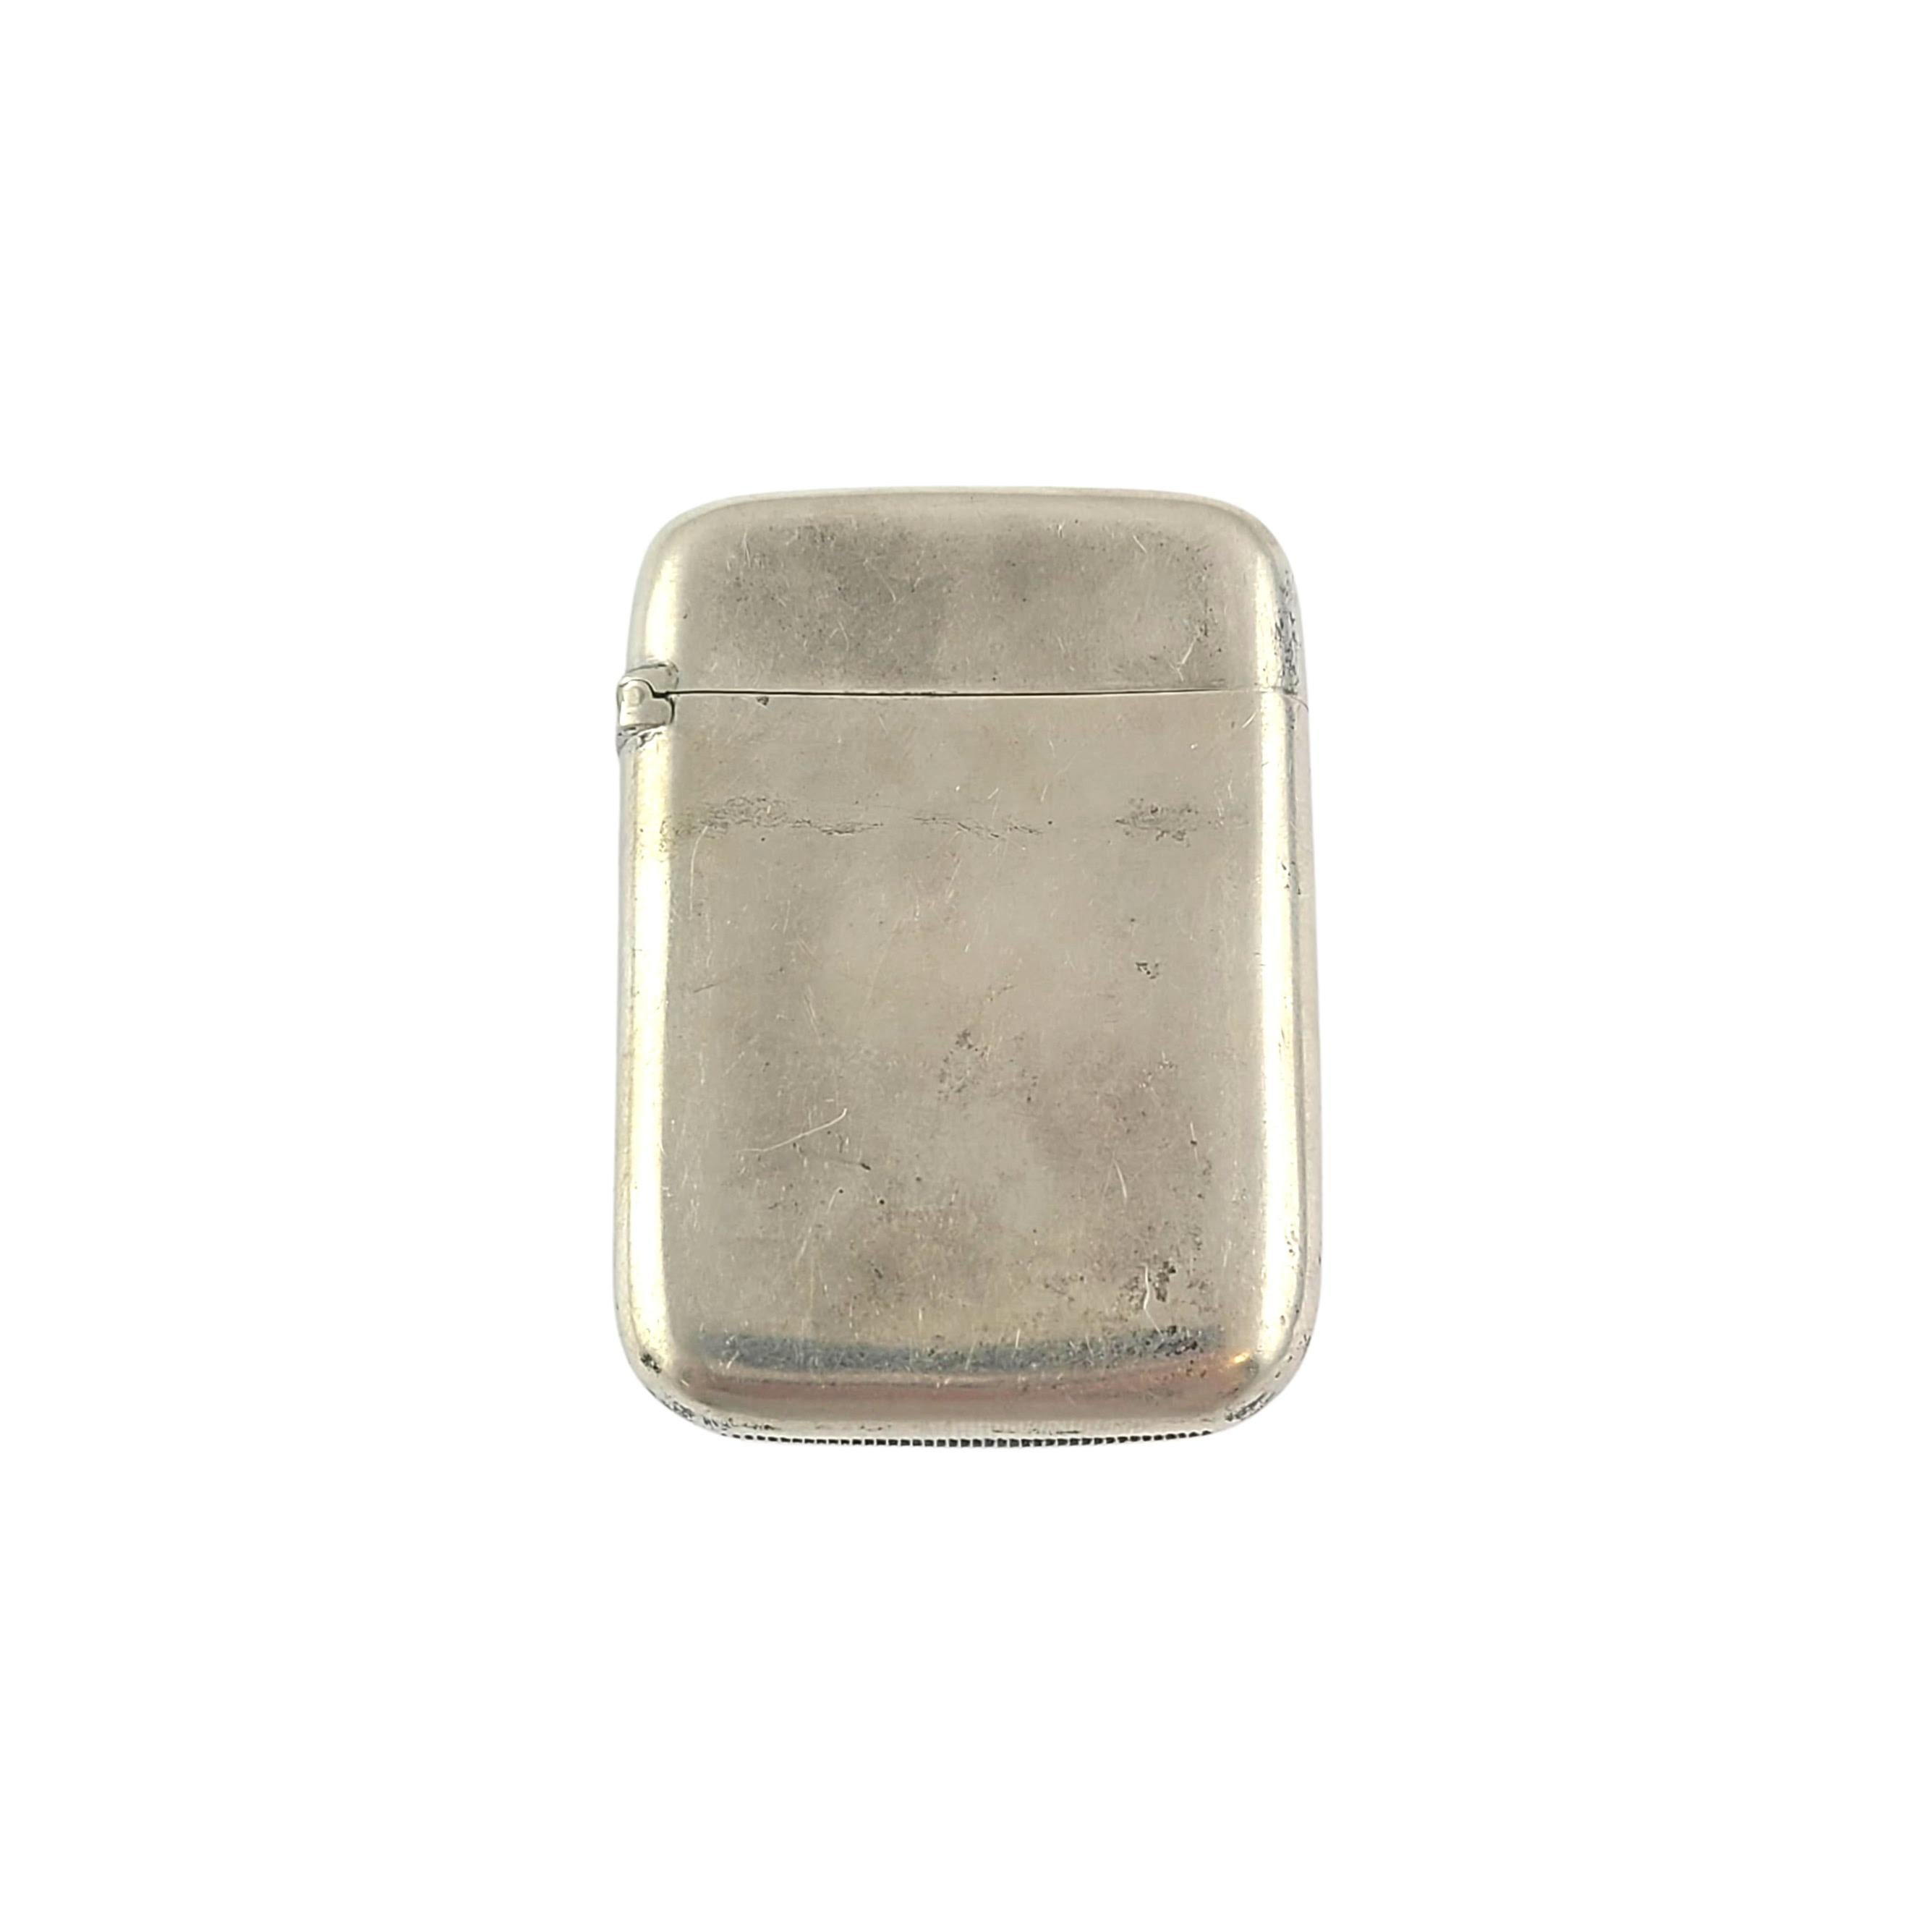 Sterling silver match safe/vesta case with monogram by R. Wallace & Sons Mfg Co.

This beautiful piece features a simple etched line design on one side, polished smooth on the other side. It has a well functioning hinge, and a striking surface on